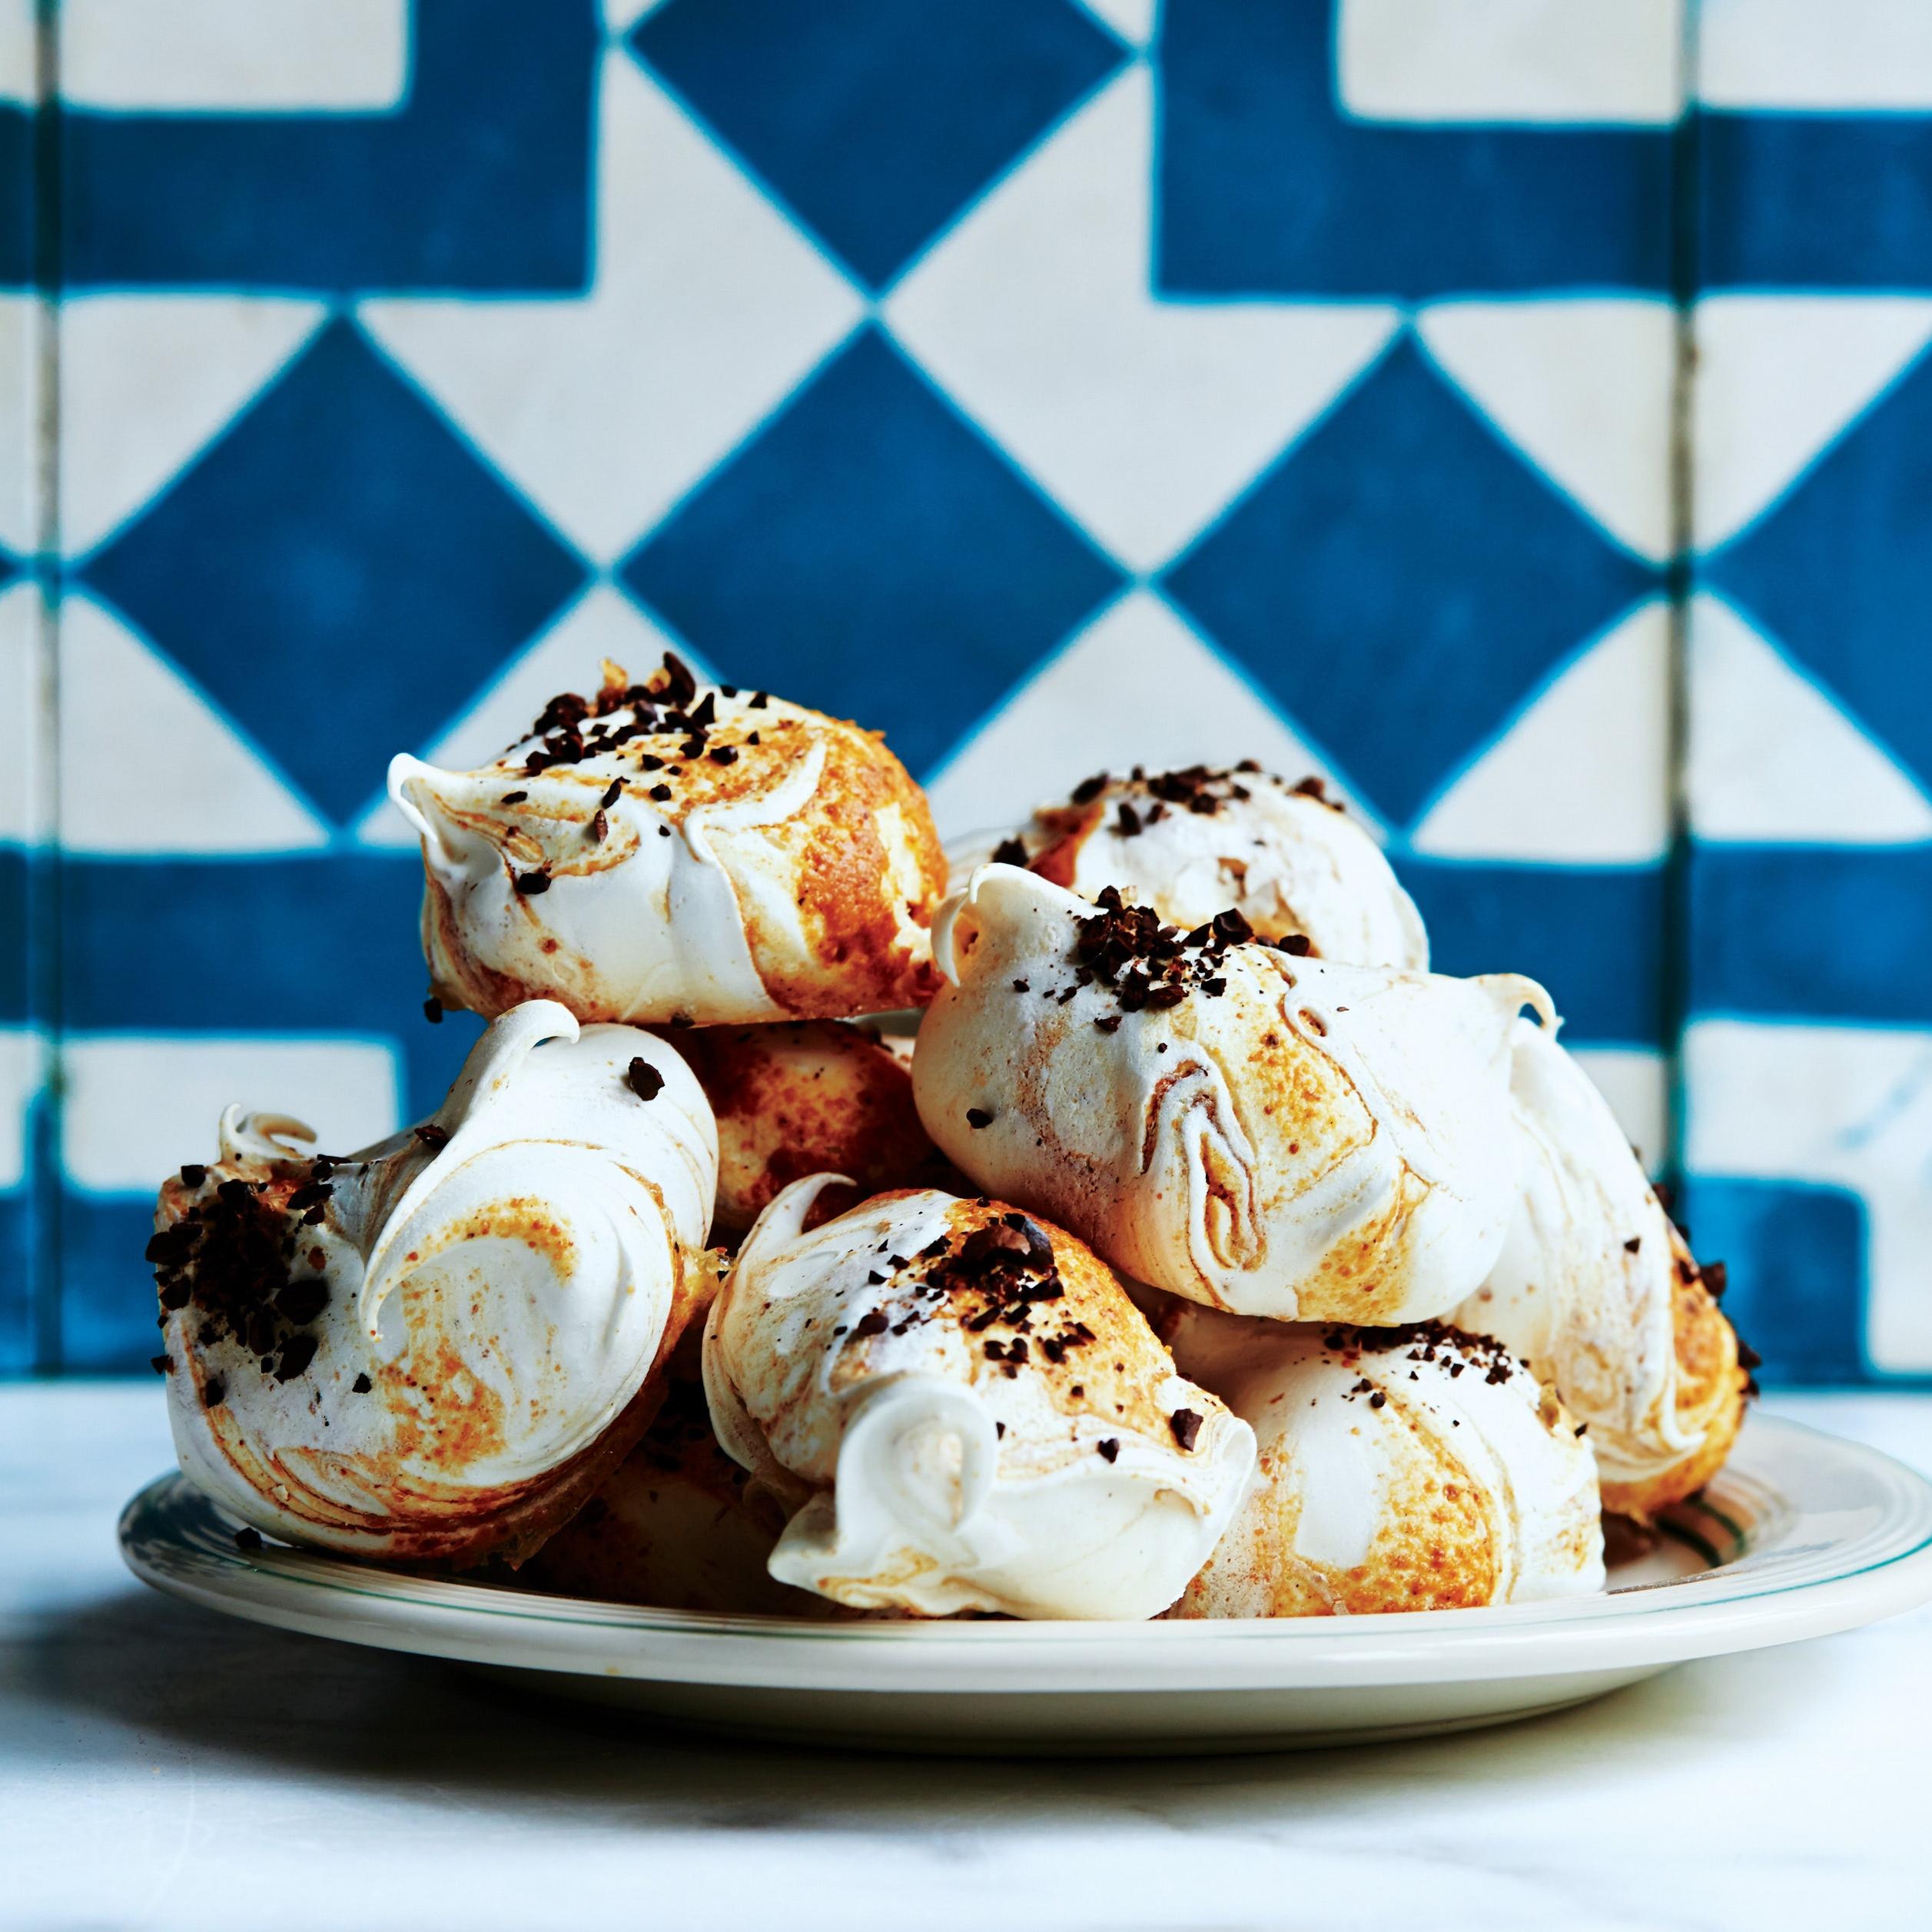  Elevate your dessert game with our Coffee Meringues with Mocha Cream!